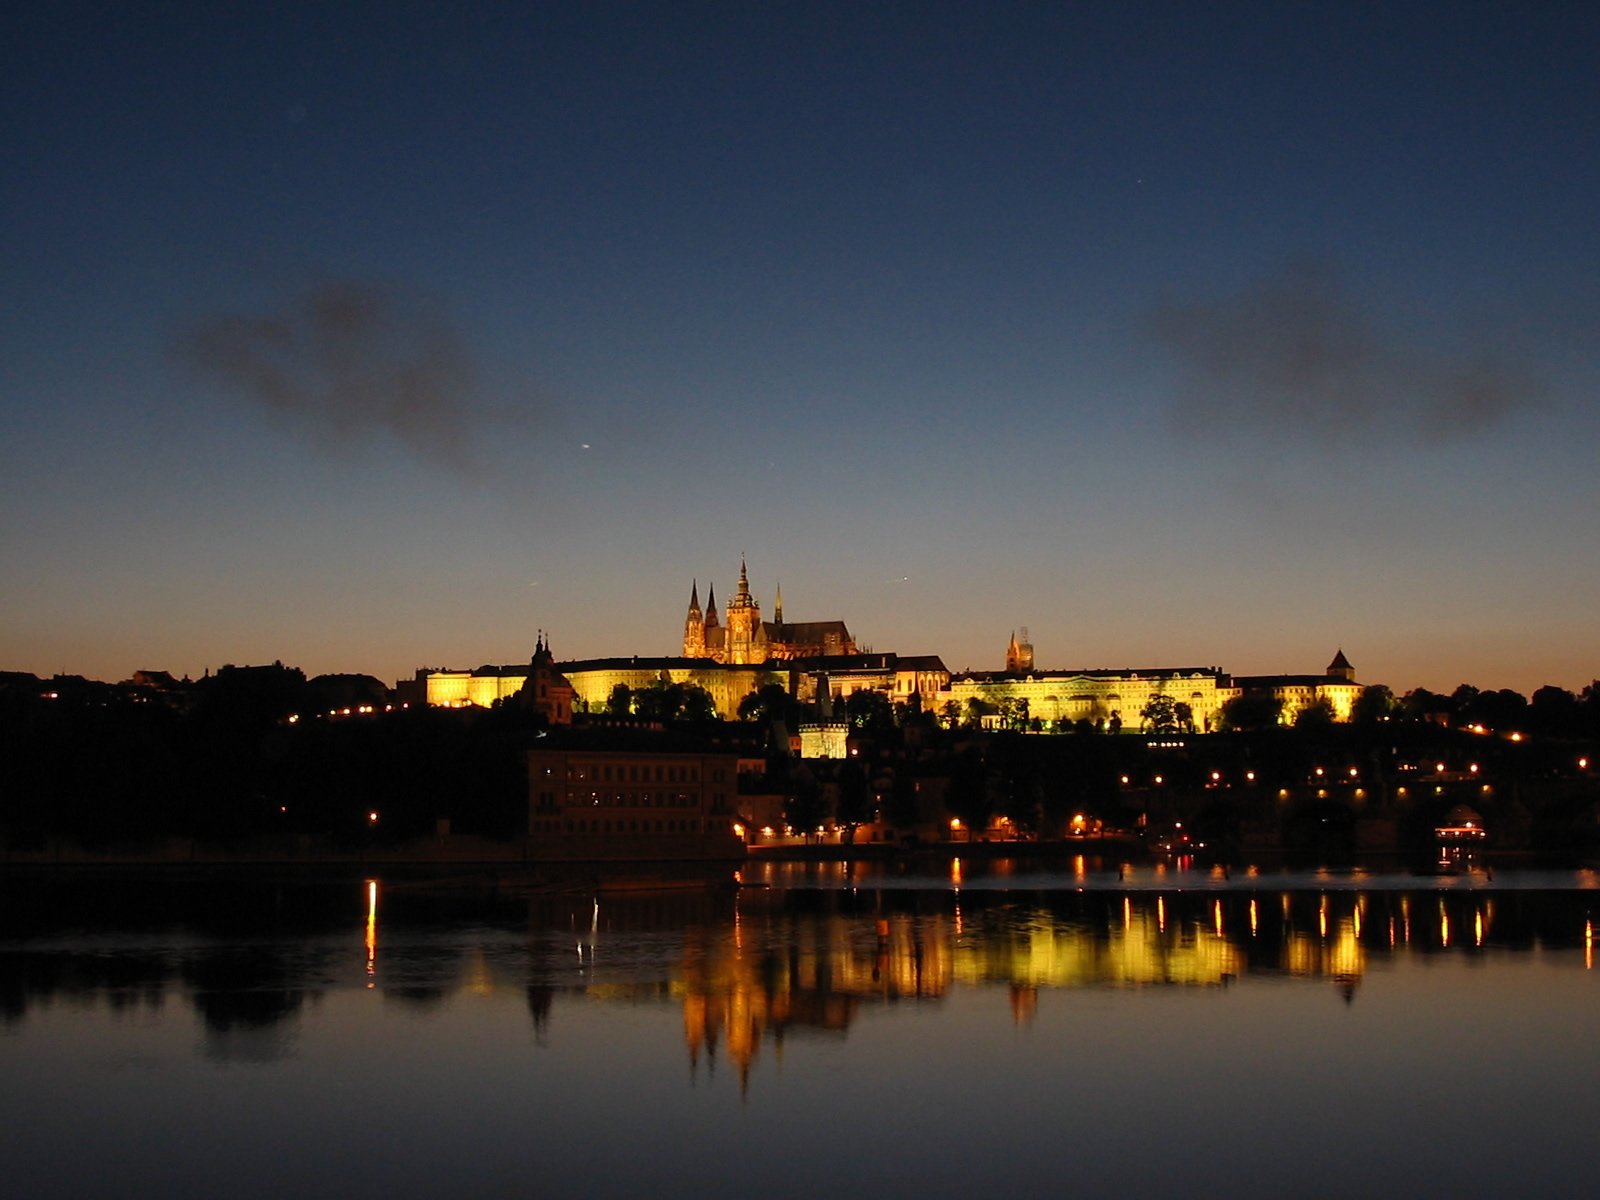 the castle of prague at night is reflected in the water